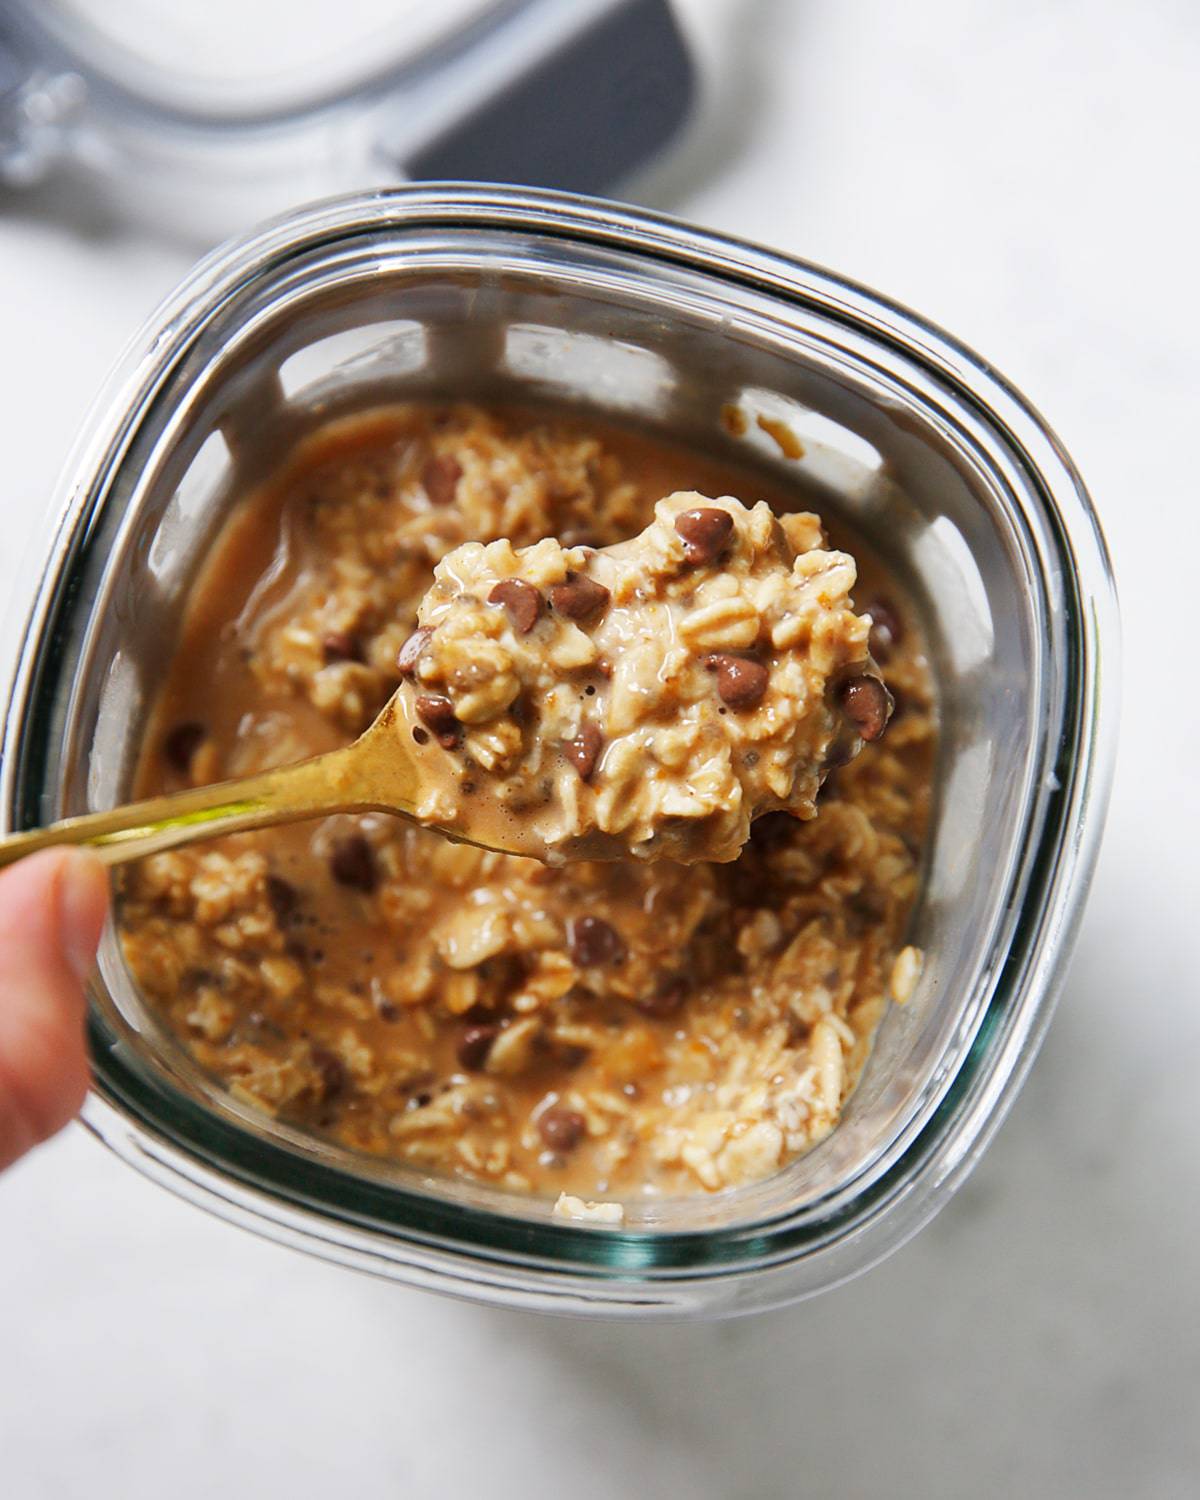 Pumpkin overnight oats in a to-go container.